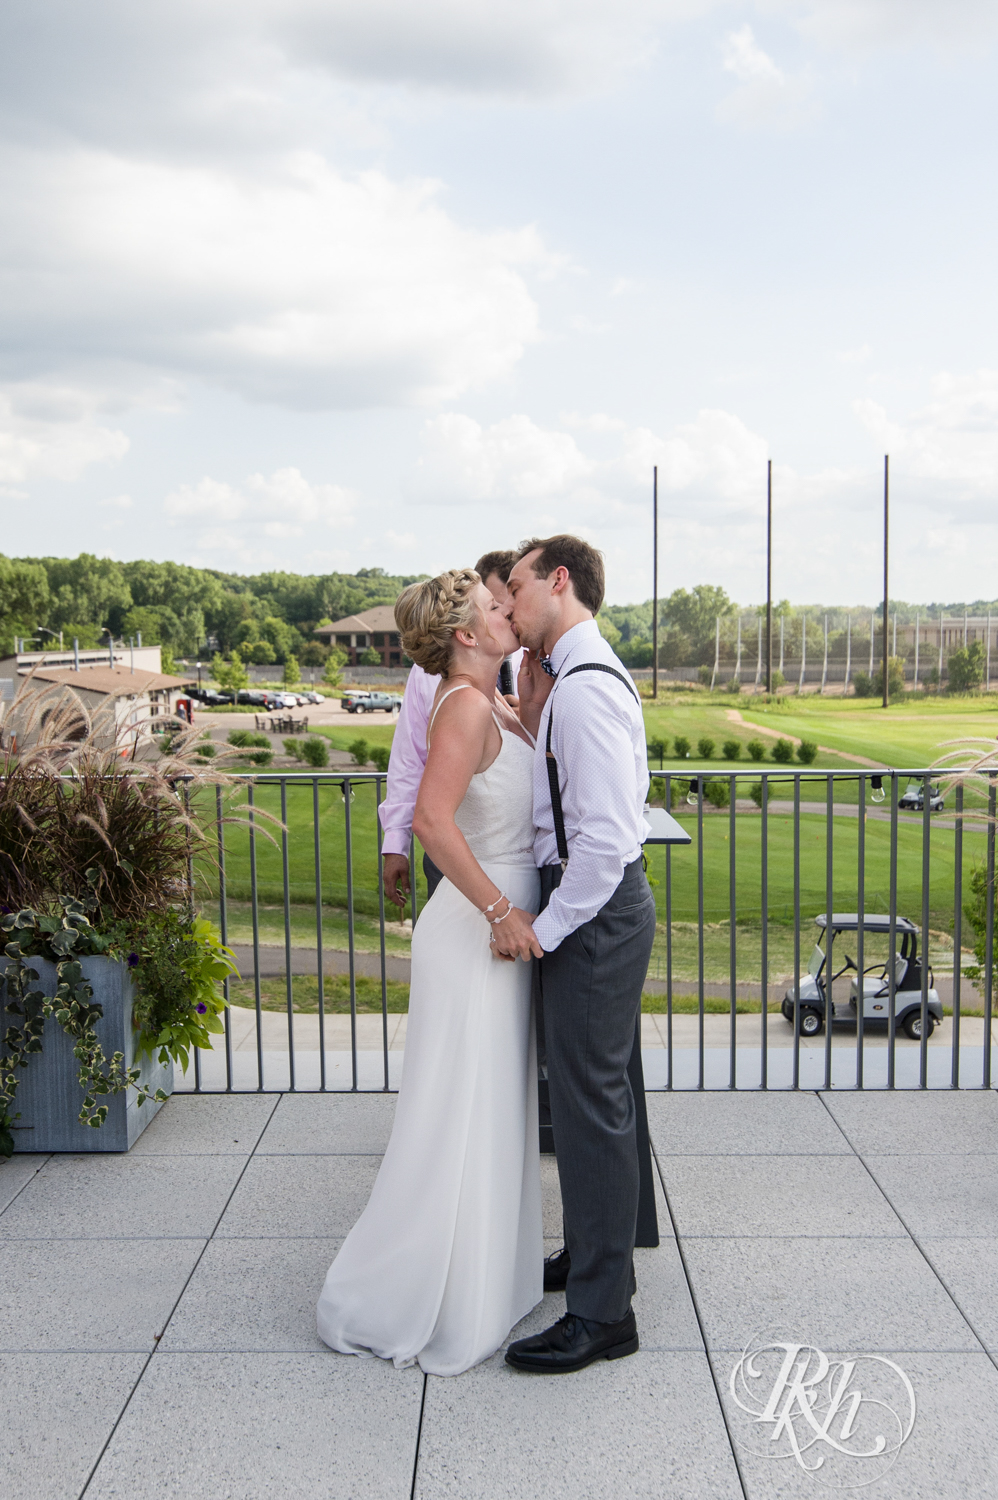 Bride and groom kiss during wedding ceremony at Brookview Golf Course in Golden Valley, Minnesota.